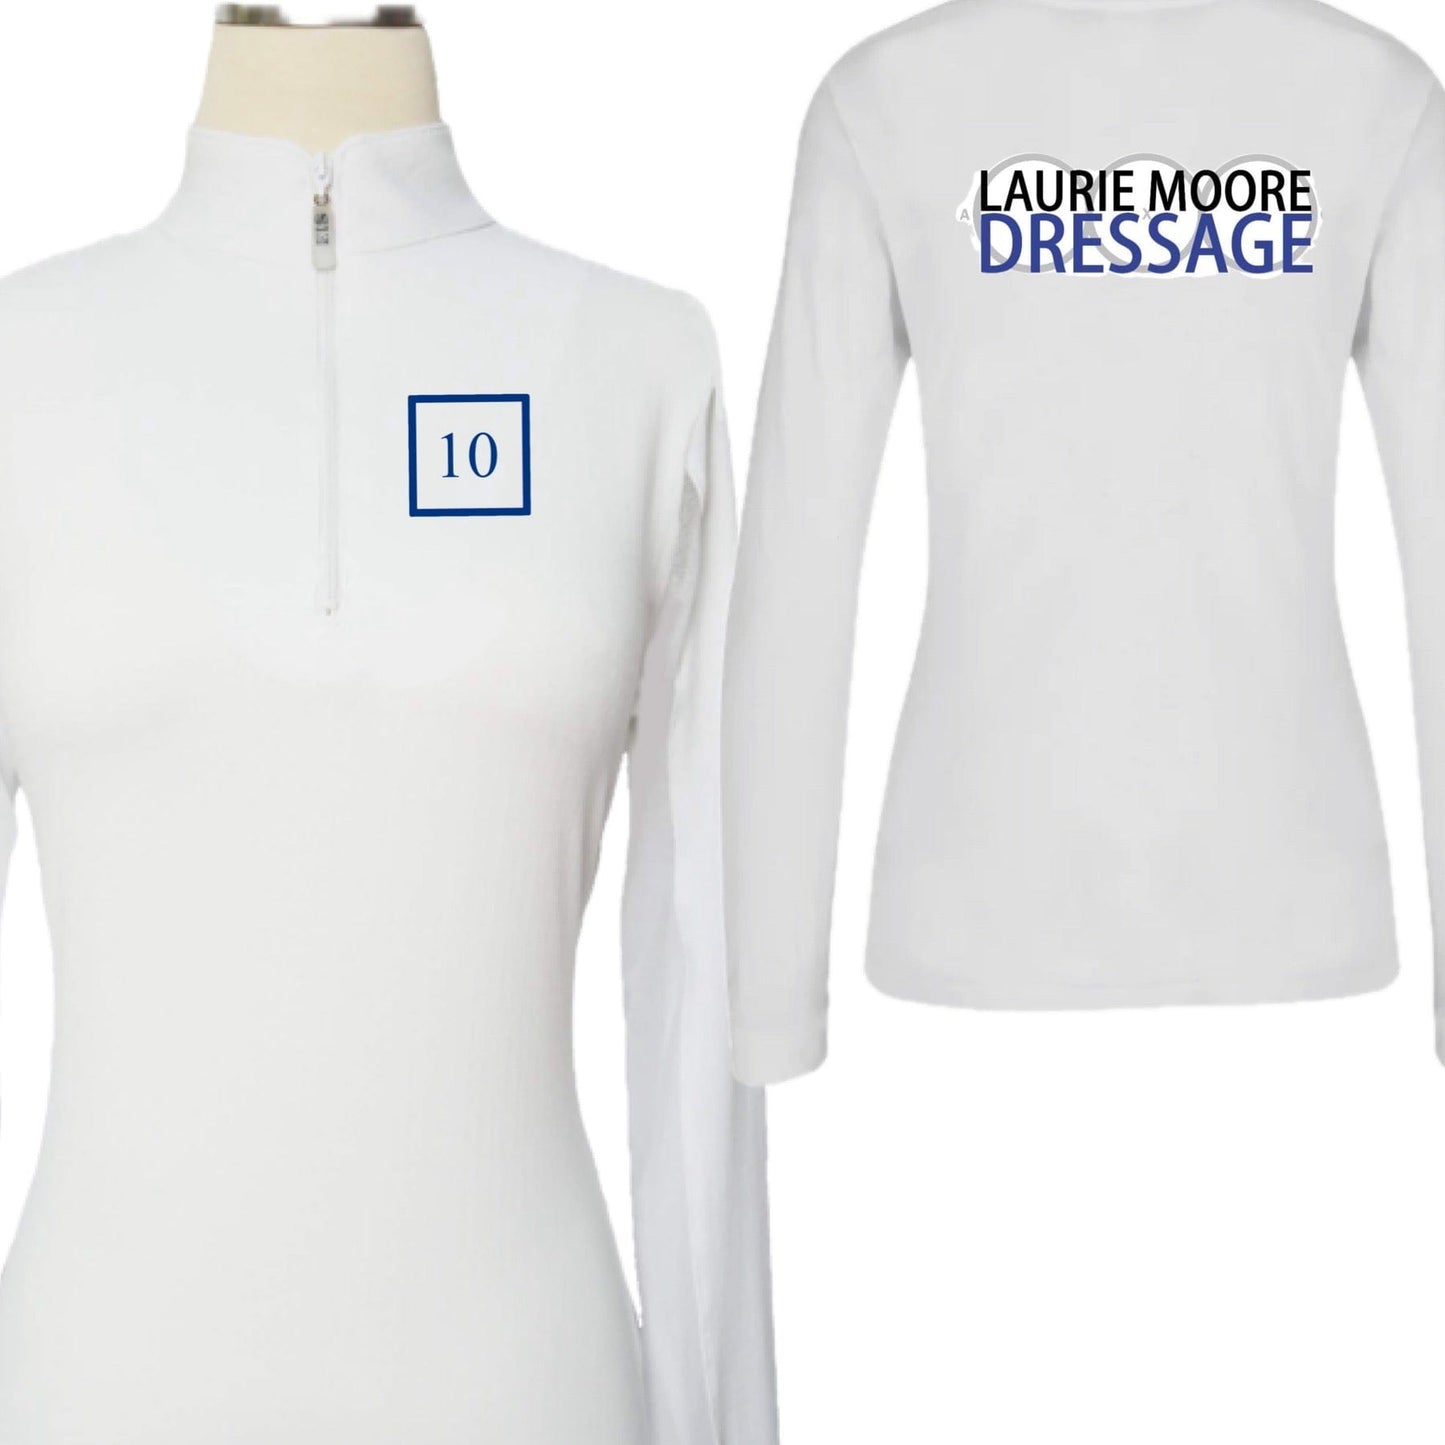 Equestrian Team Apparel Laurie Moore Dressage Sun Shirts equestrian team apparel online tack store mobile tack store custom farm apparel custom show stable clothing equestrian lifestyle horse show clothing riding clothes horses equestrian tack store